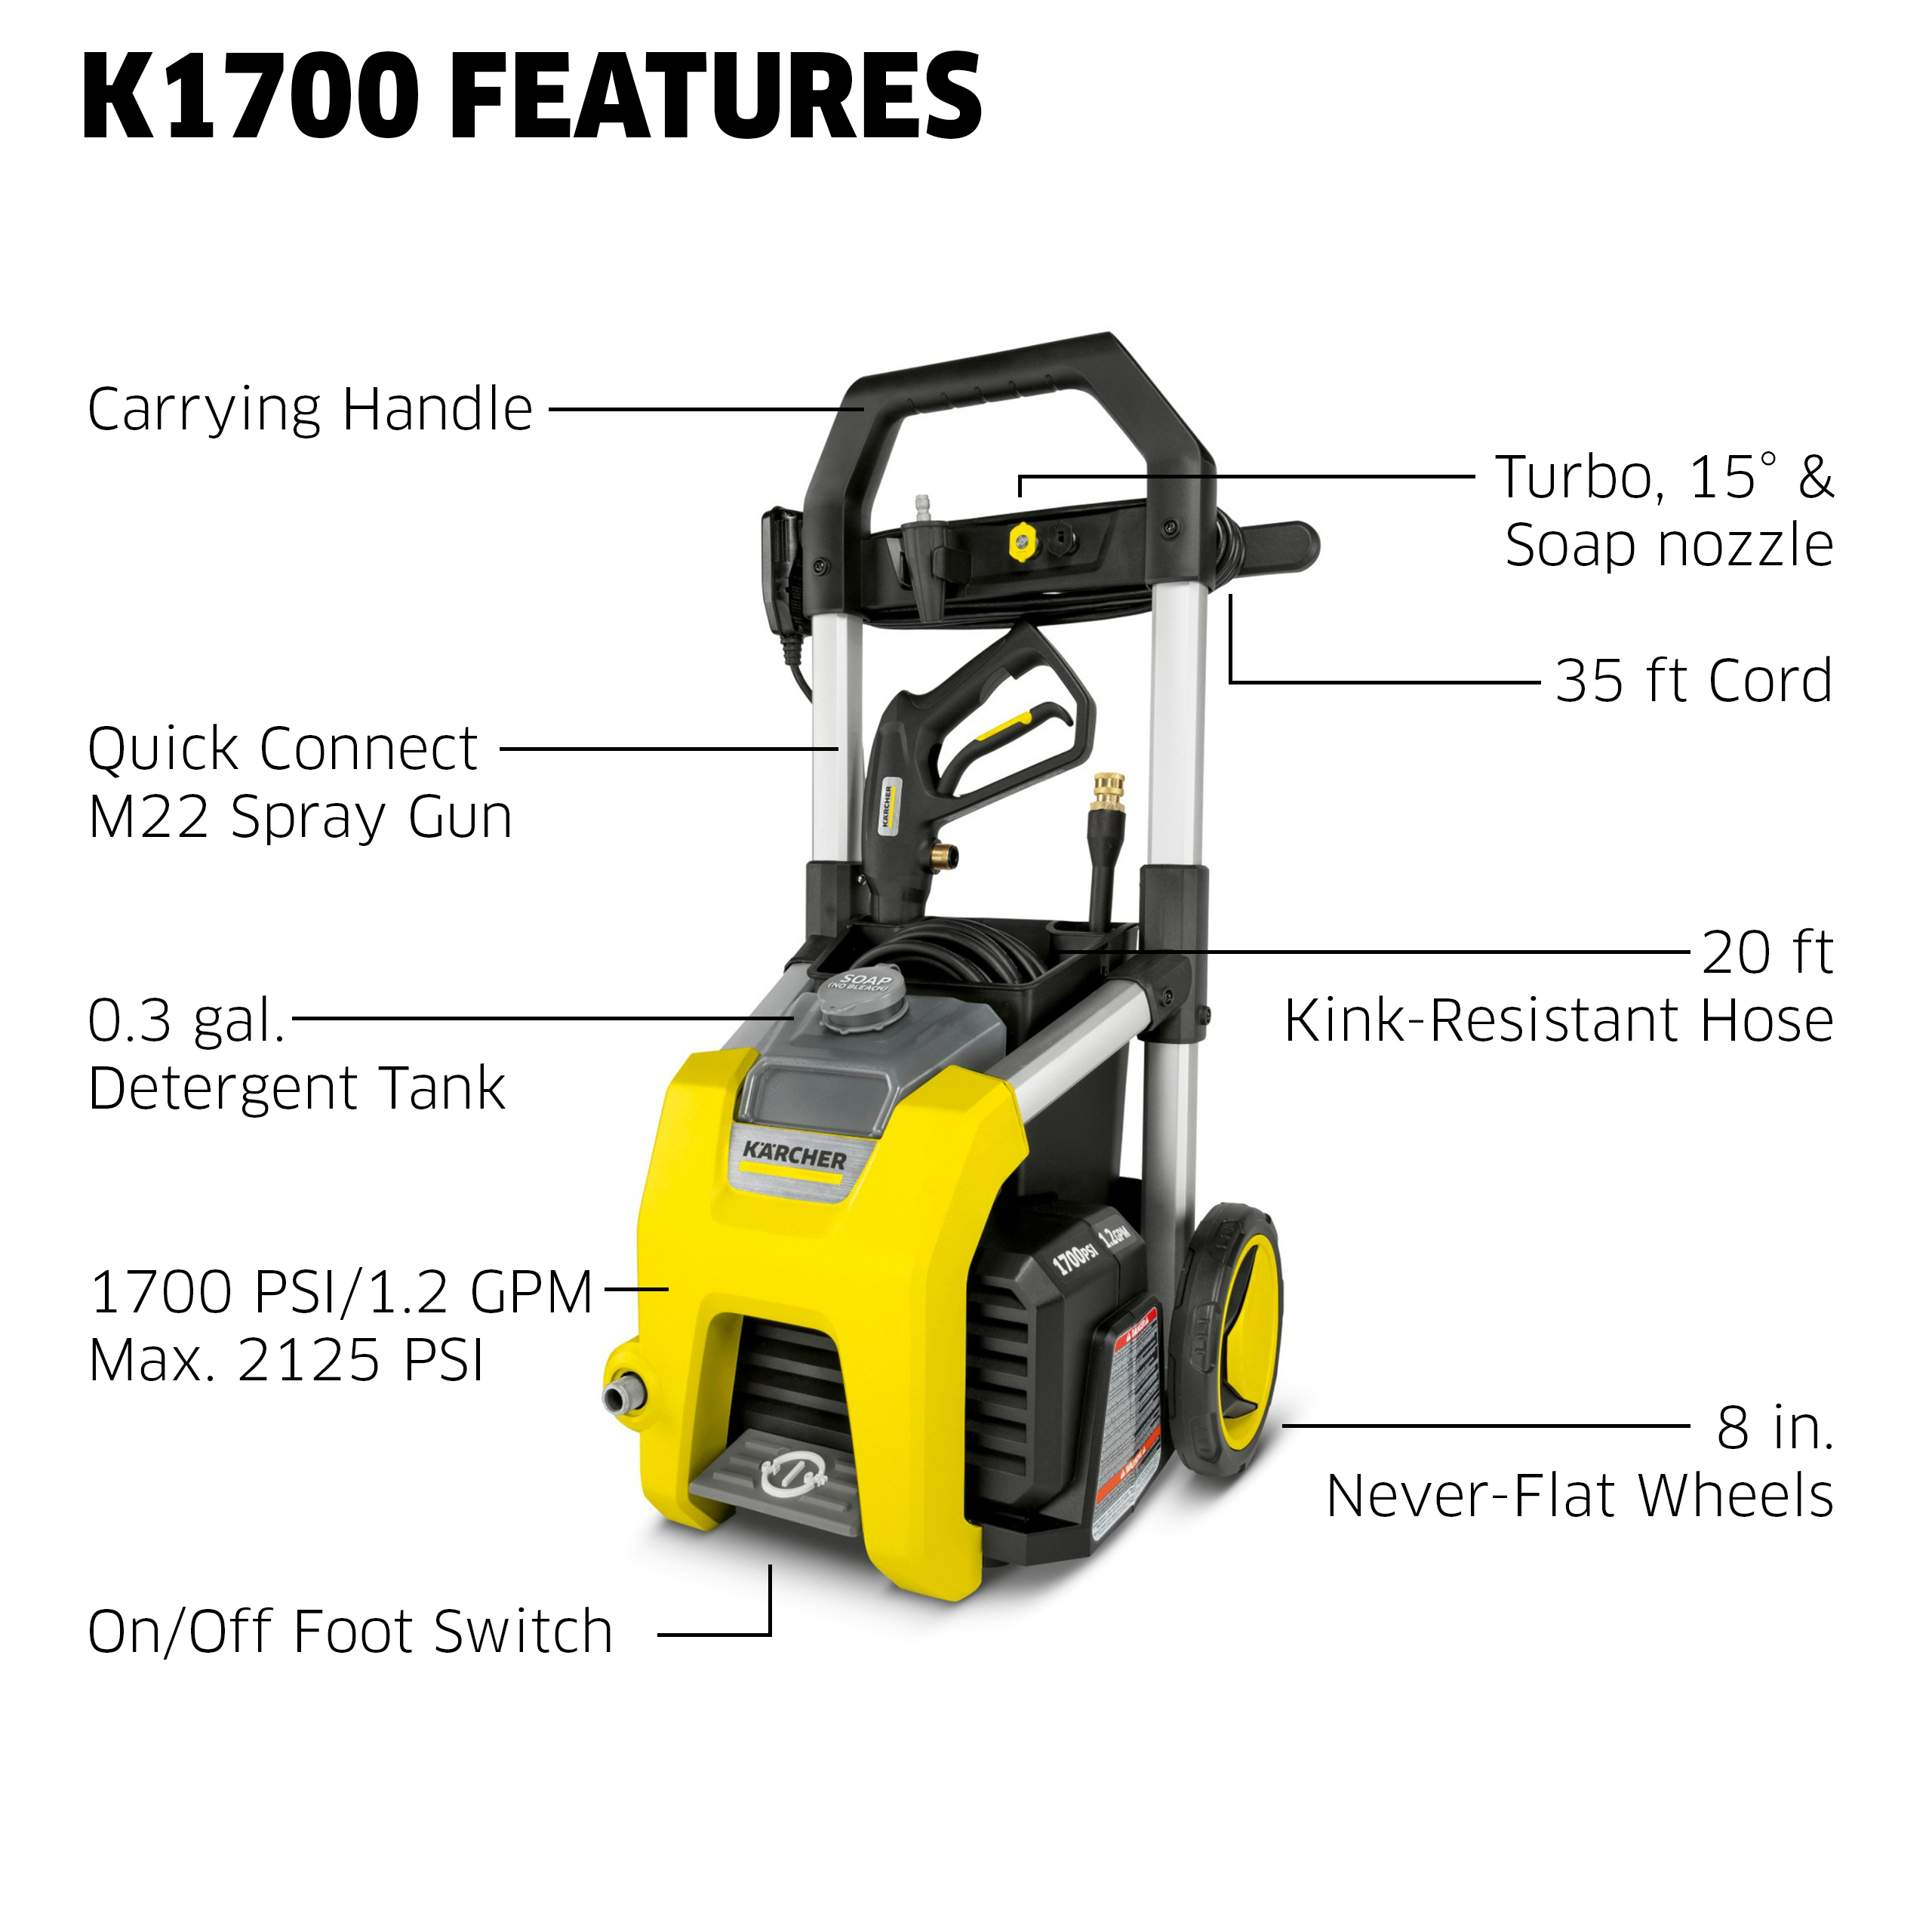 Karcher K1700, Max 2125 PSI Pressure Washer with Hose, Spray Gun, 3 Nozzles, 1.2 GPM, Power Washer - image 3 of 9